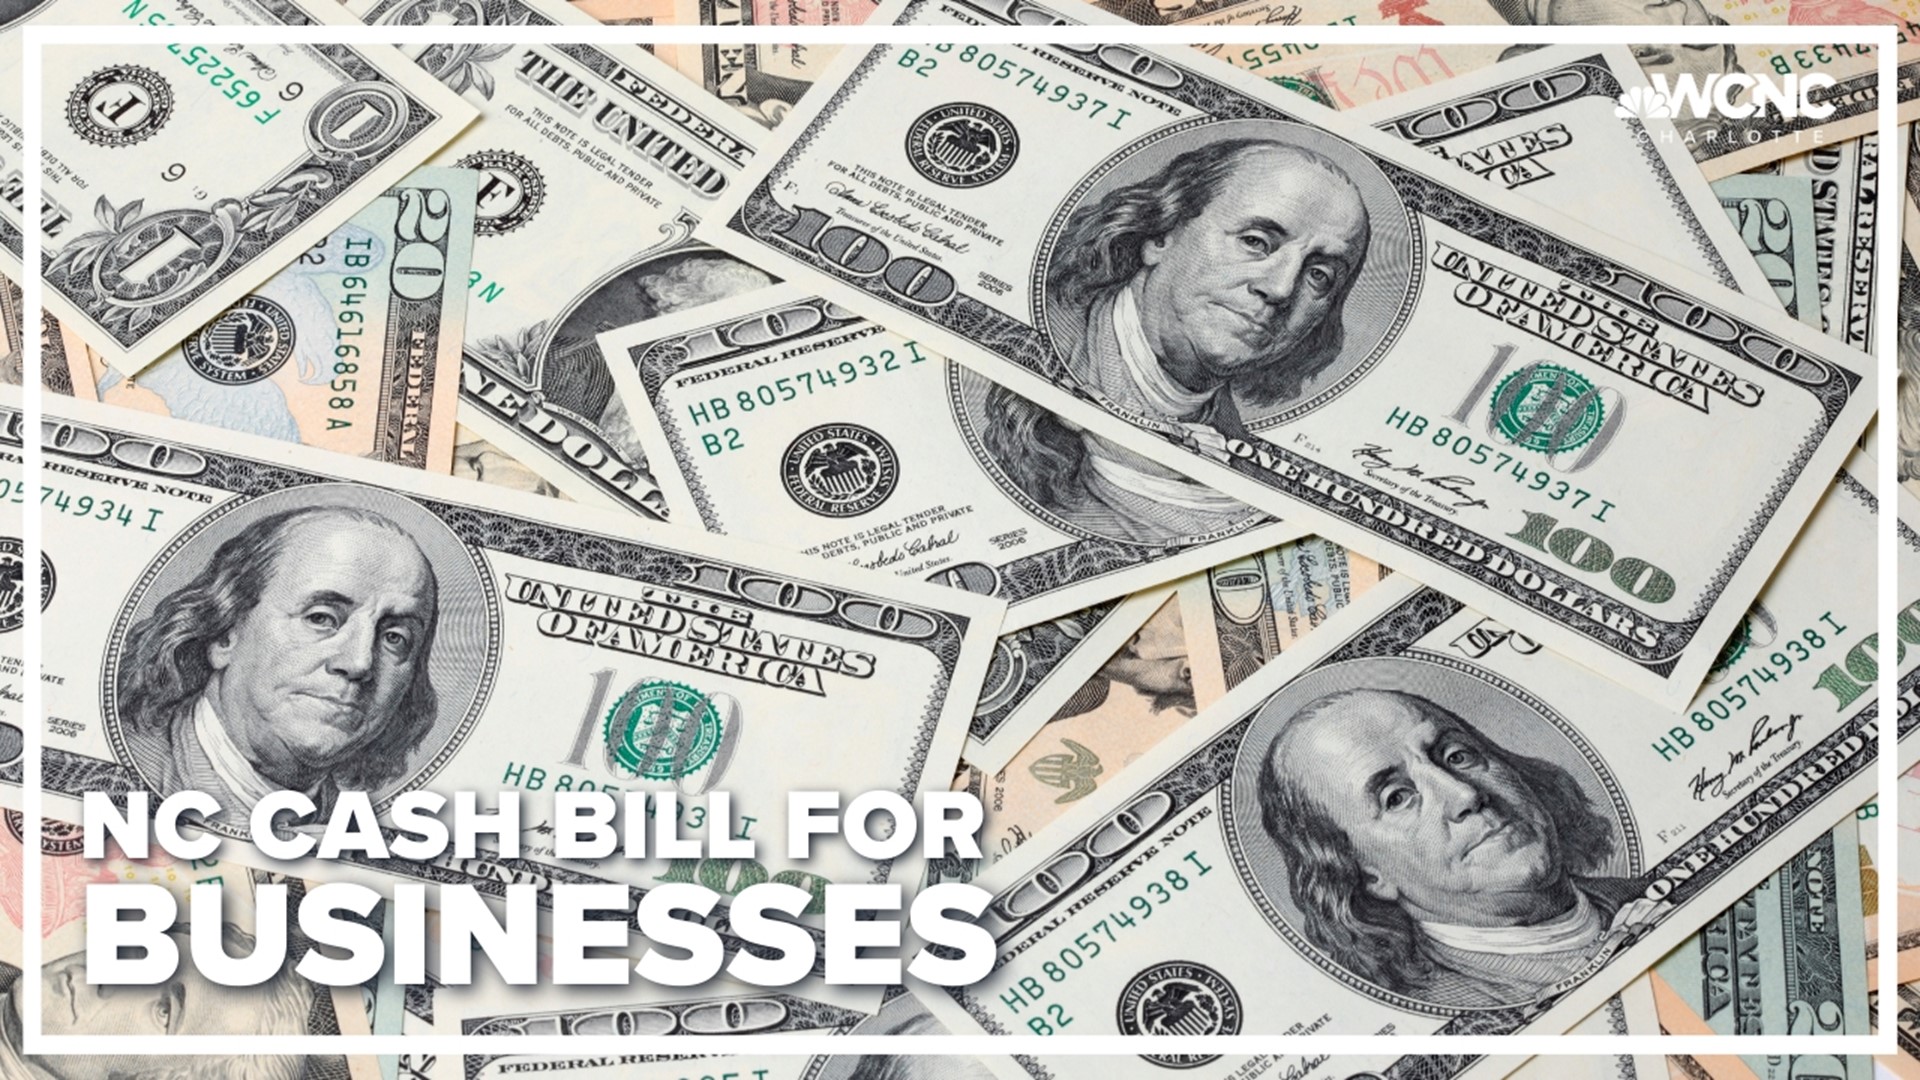 More businessess are going cashless. However, North Carolina lawmakers introduced a bill that would require certain businesses accept cash.